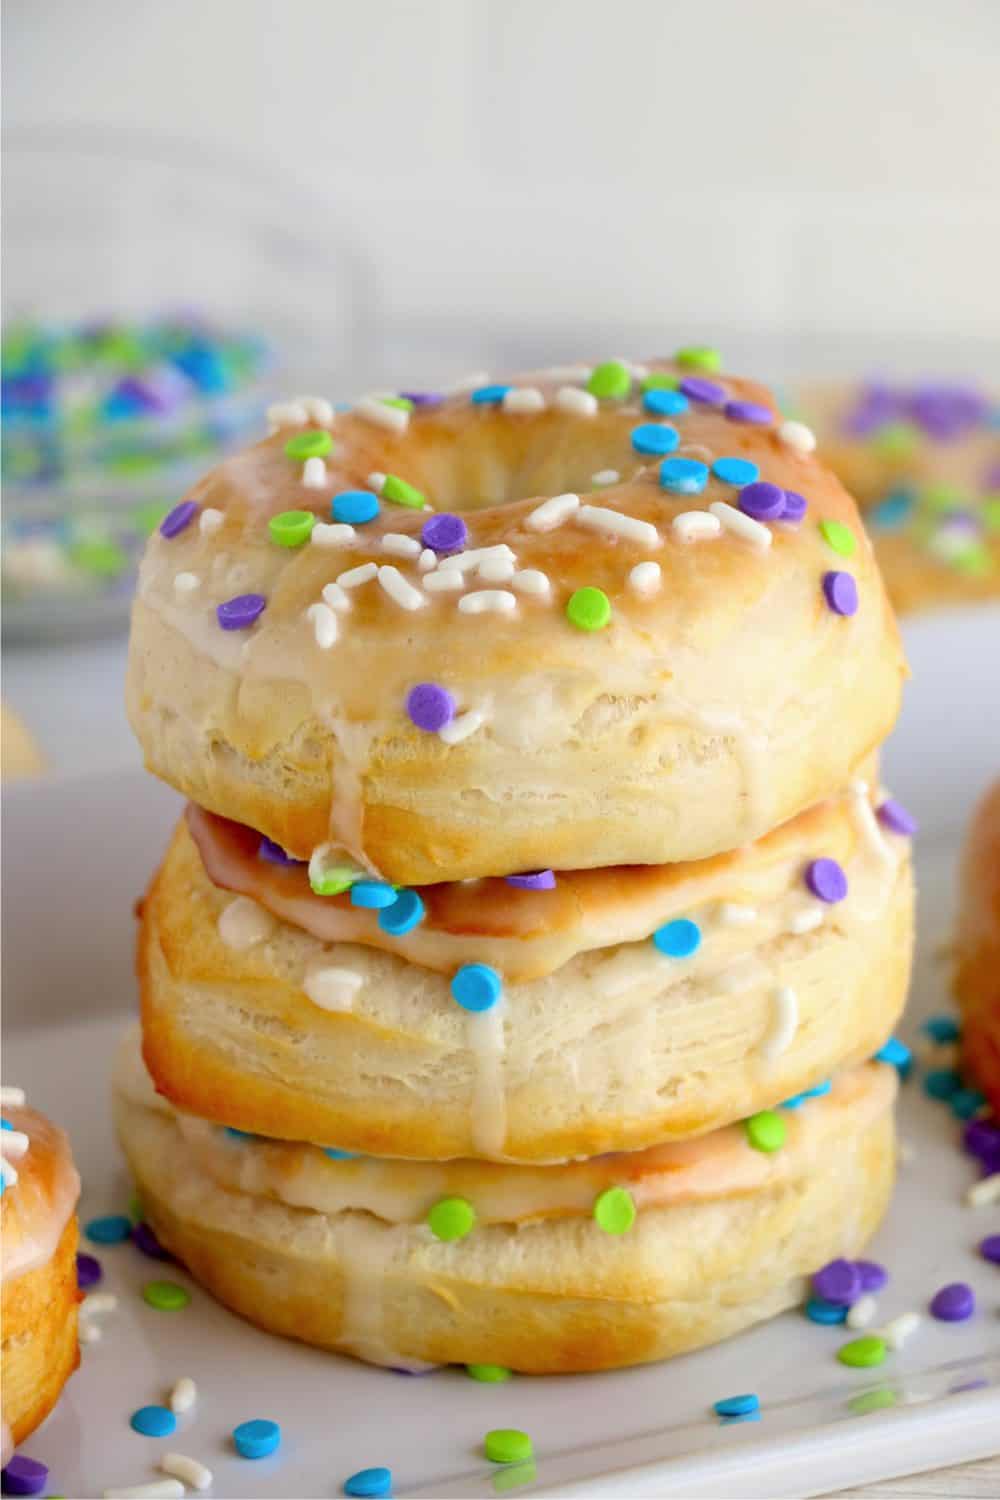 Air fryer donuts from biscuits with sprinkles and icing stacked up on top of each other